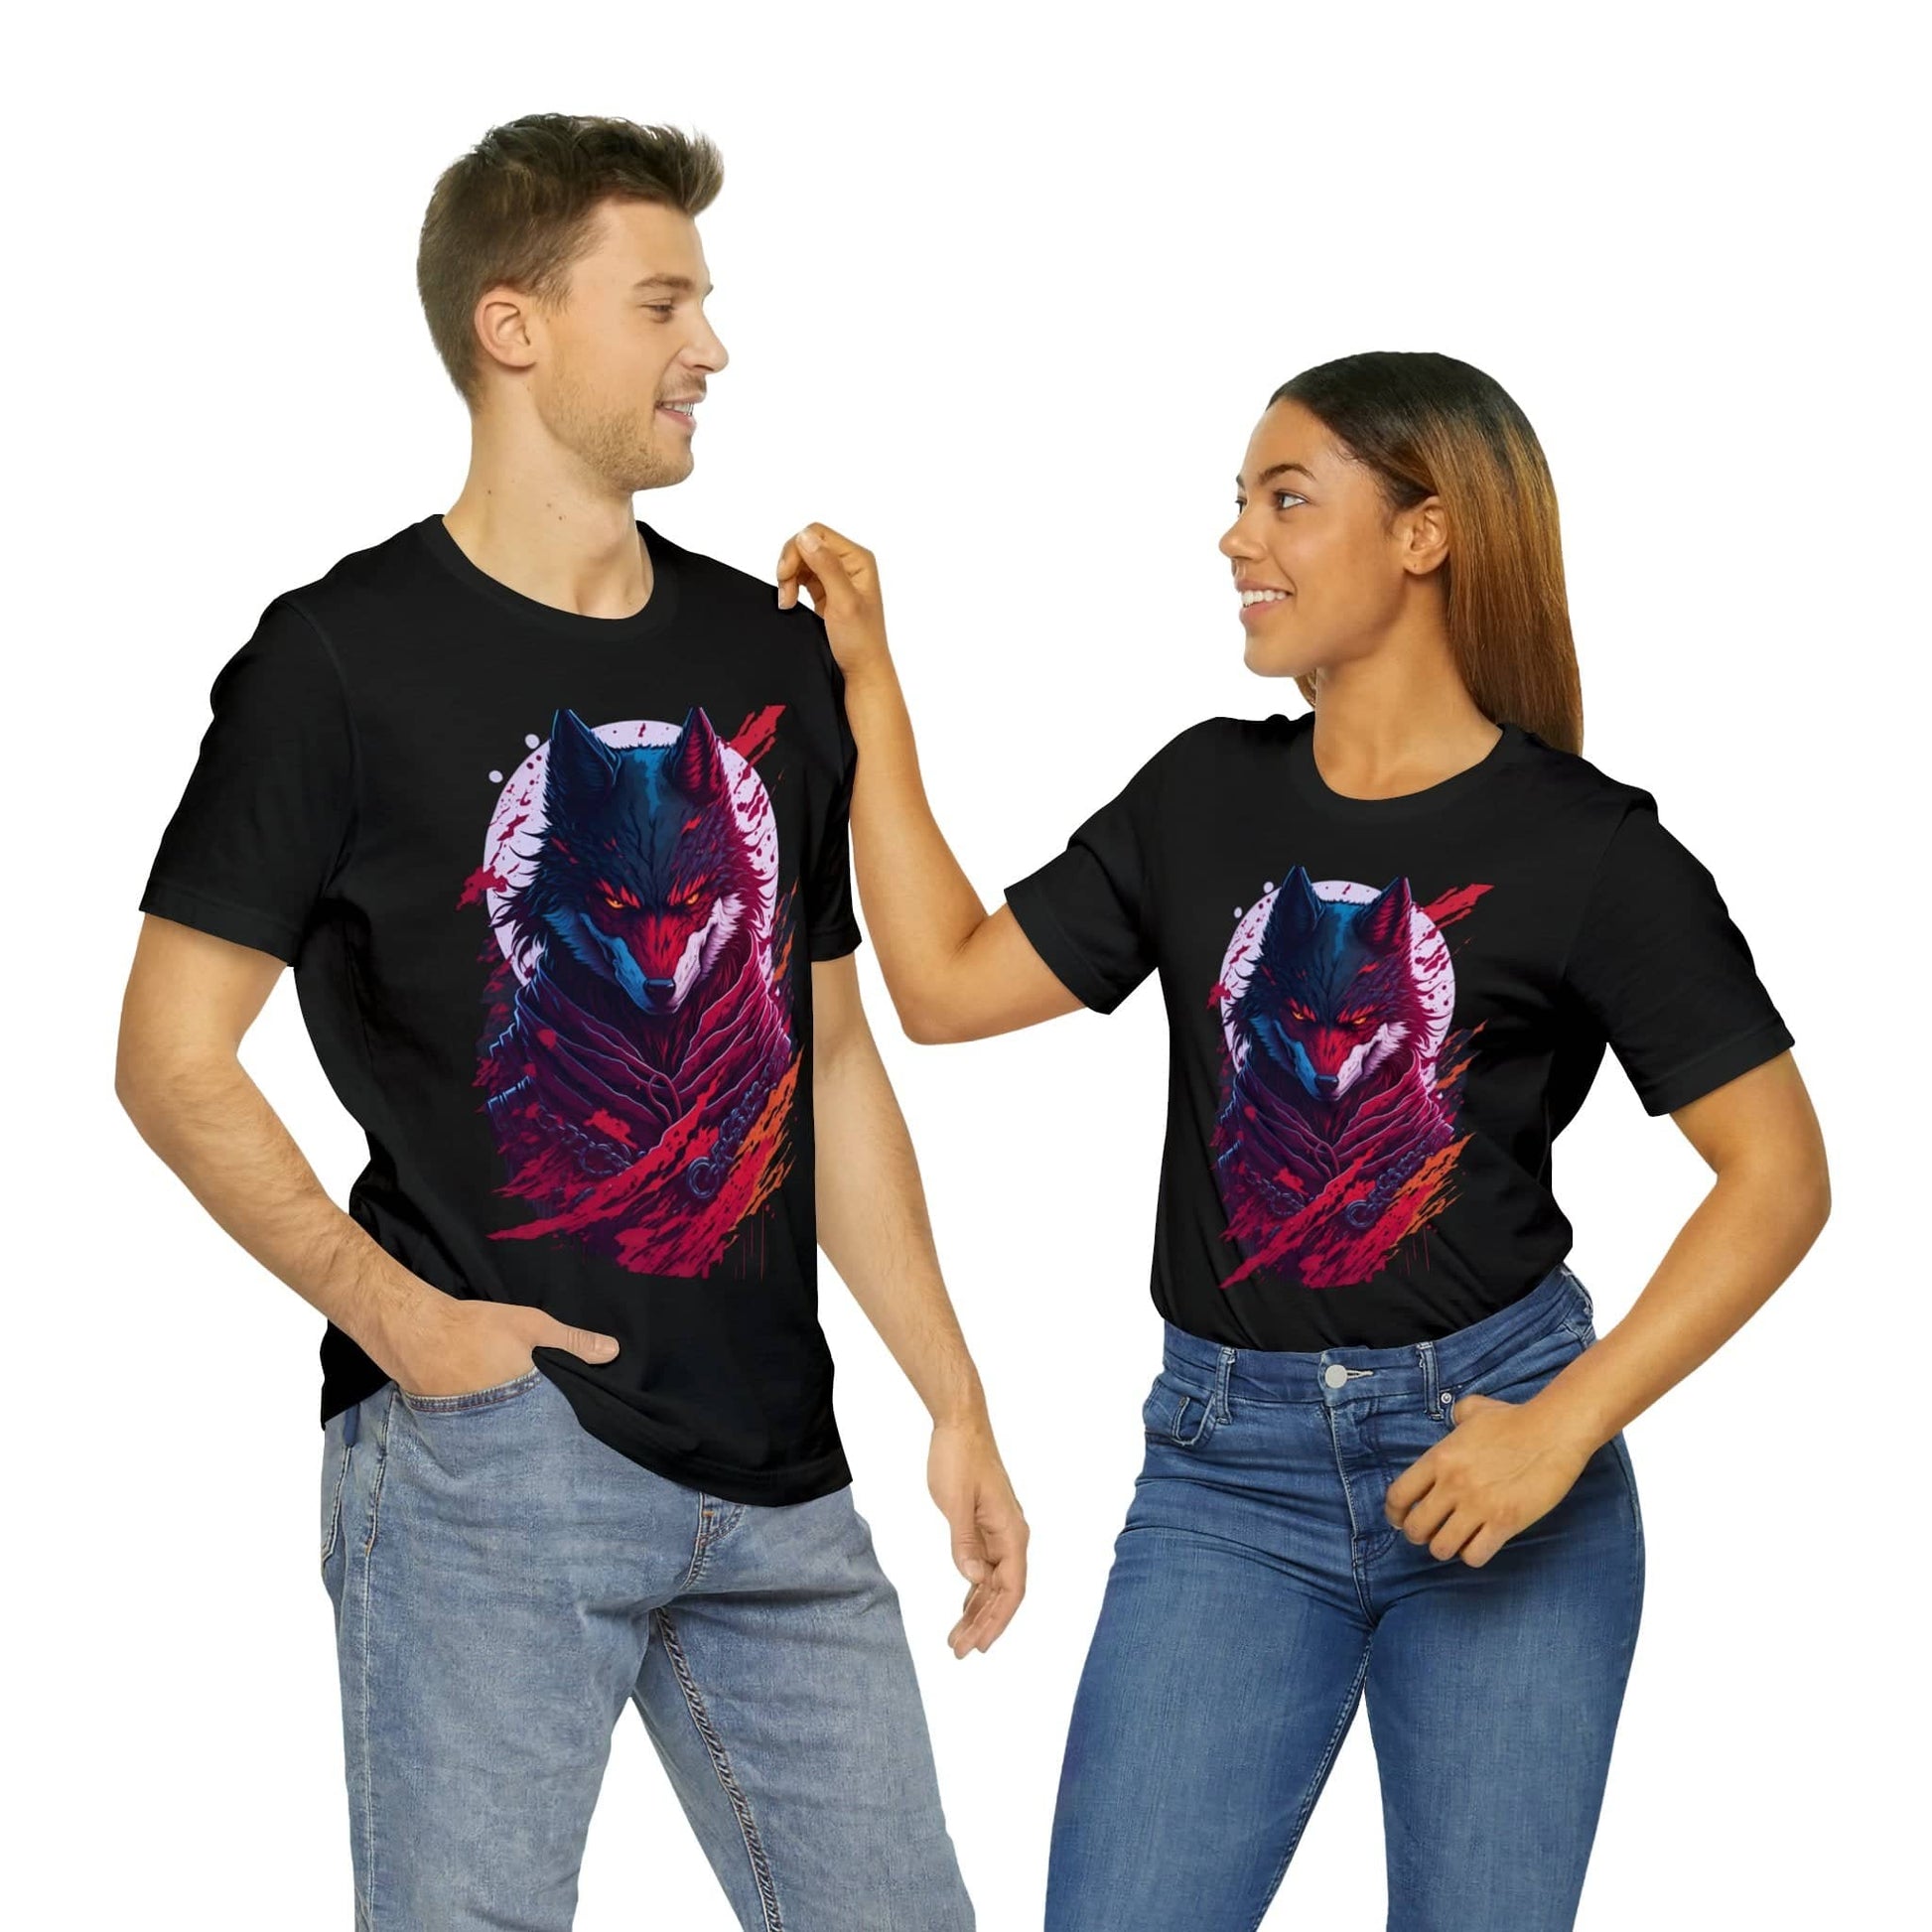 "Alex Hart: Unique T-Shirt Designs, American Design, Express Style Boldly, Fashion Trends, Personal Style, Exclusive Offers" T-Shirt Bigger Than Life   